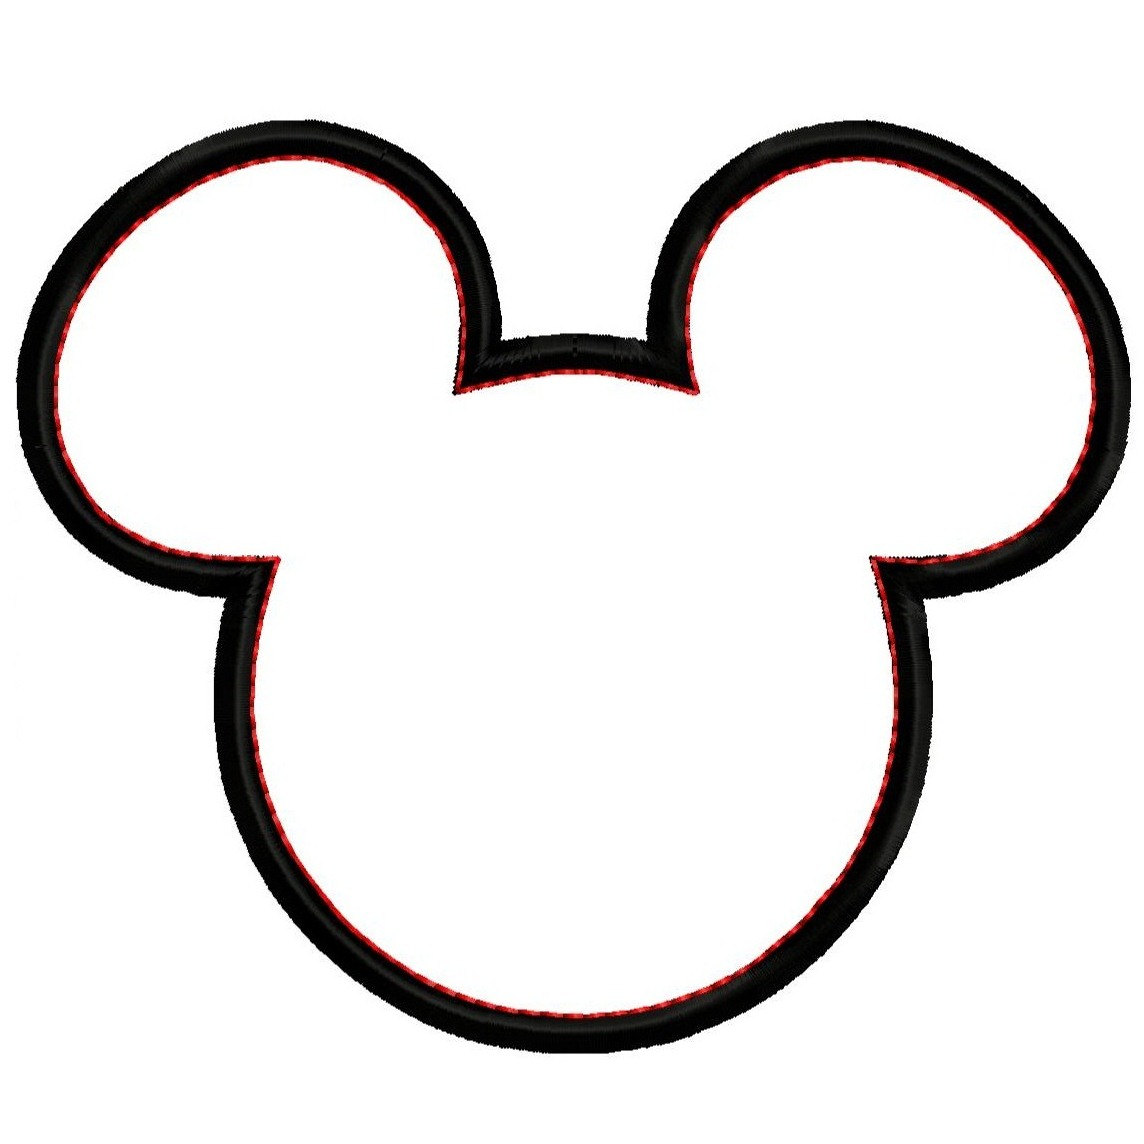 Mickey Mouse Head Silhouette   Clipart Panda   Free Clipart Images